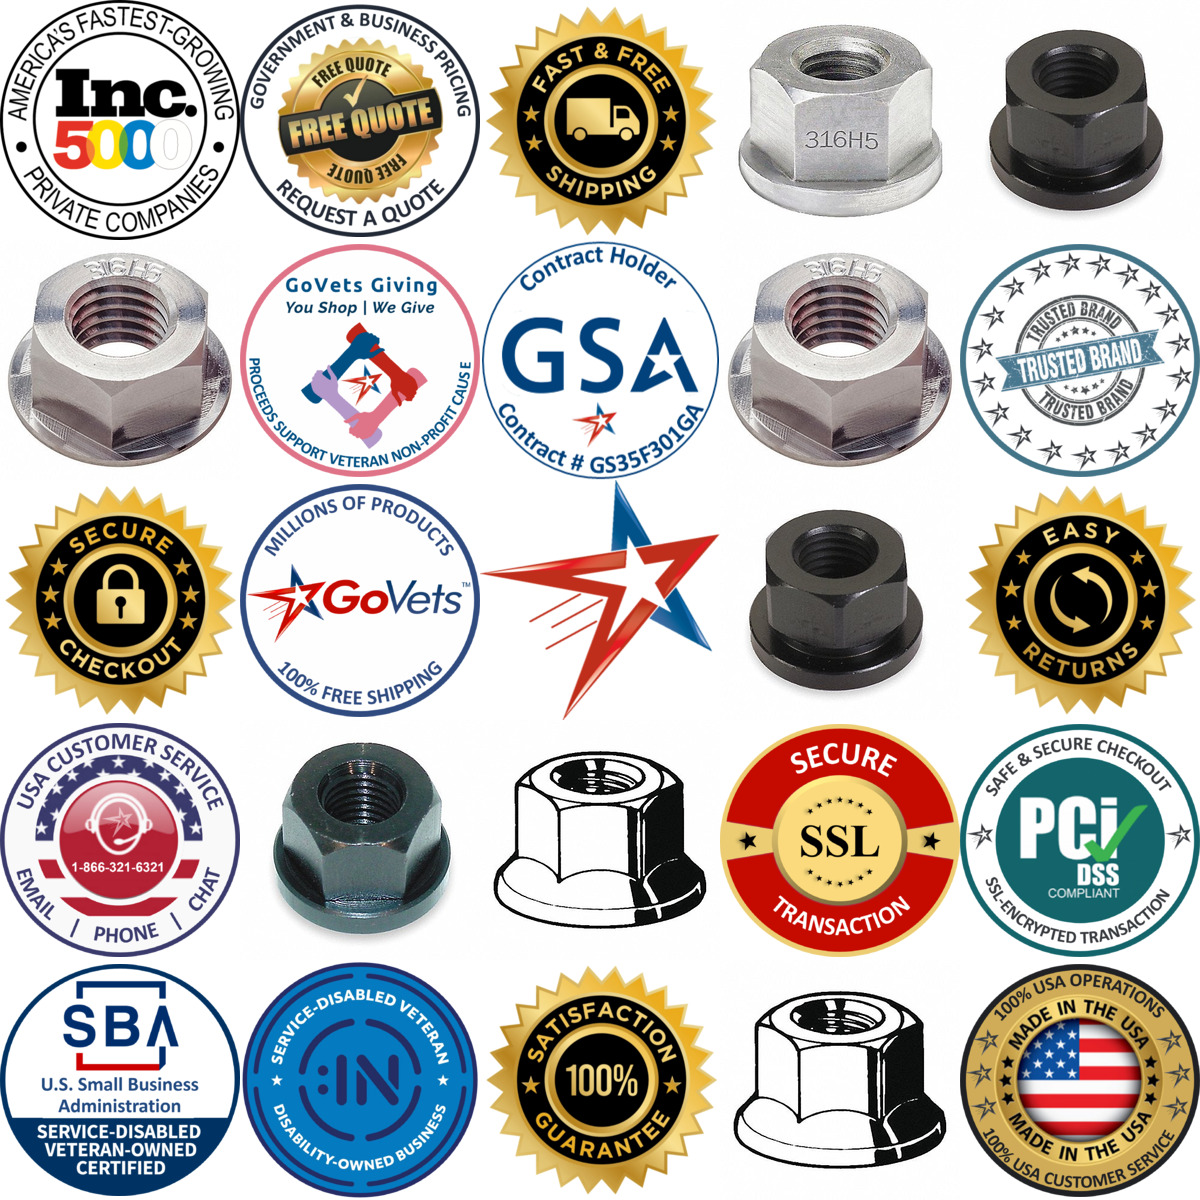 A selection of Standard Flange Nuts products on GoVets